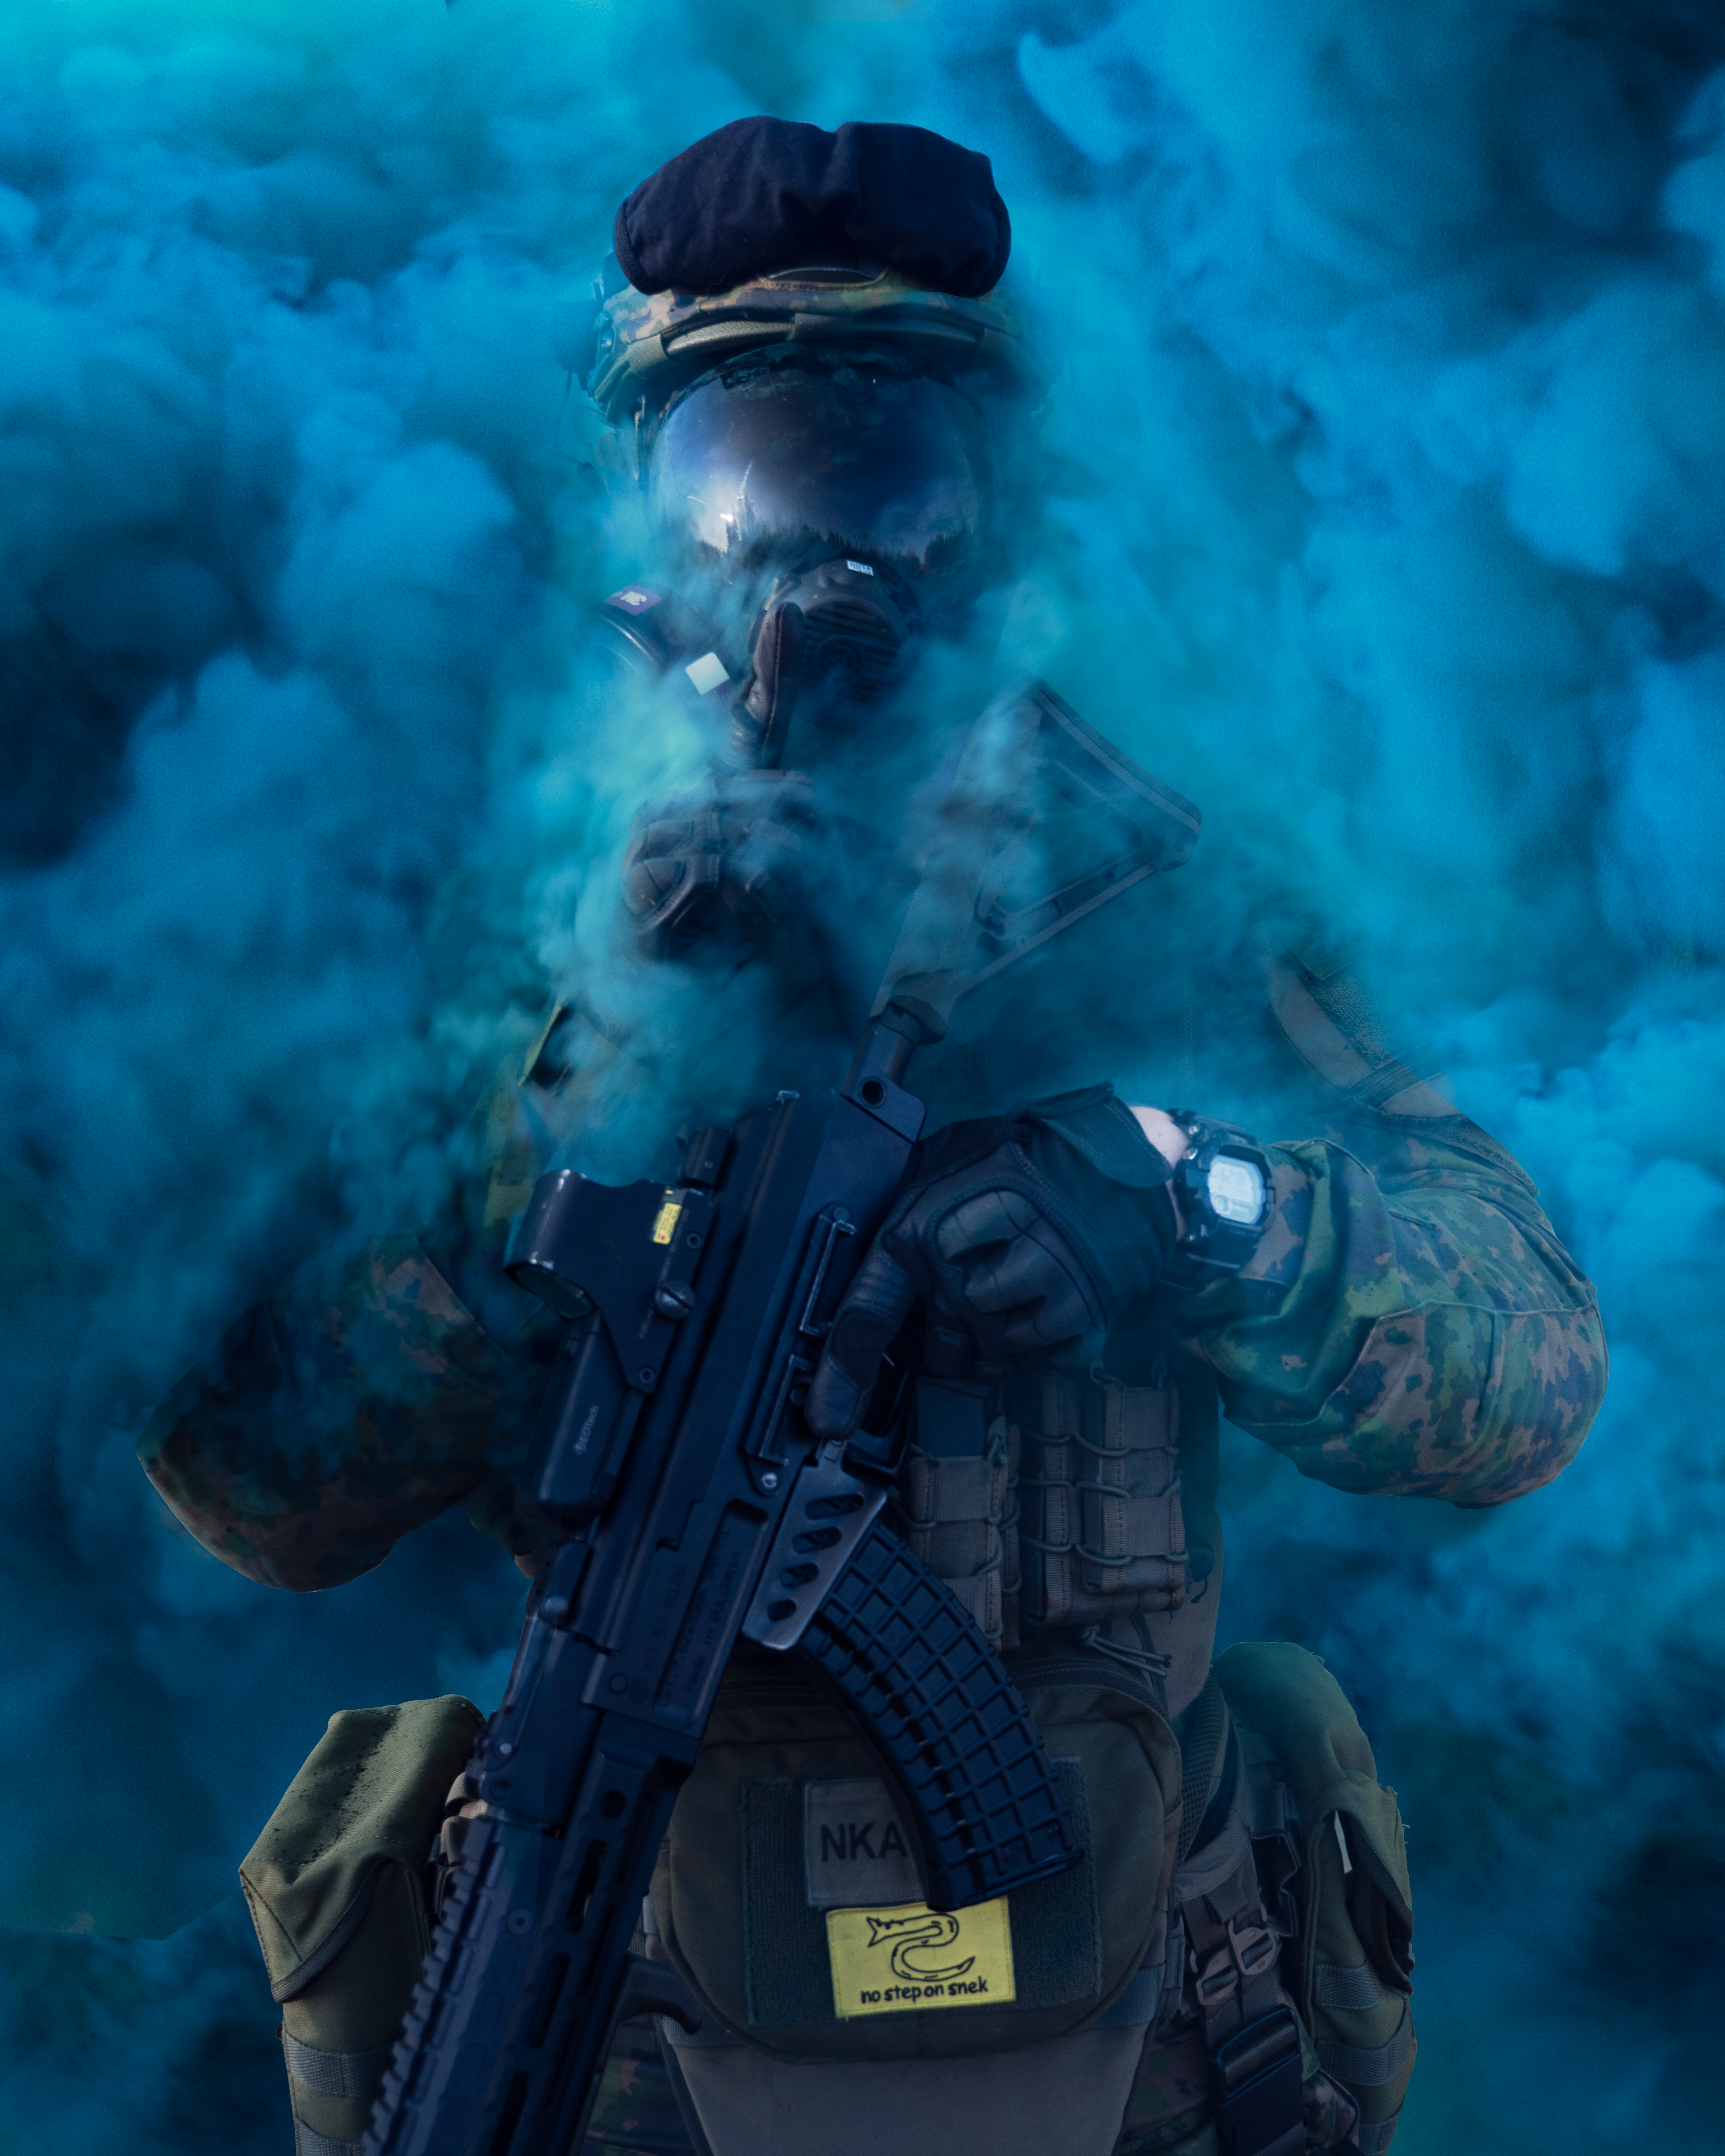 Man standing in blue smoke with a rifle in hand. He has a gas mask.